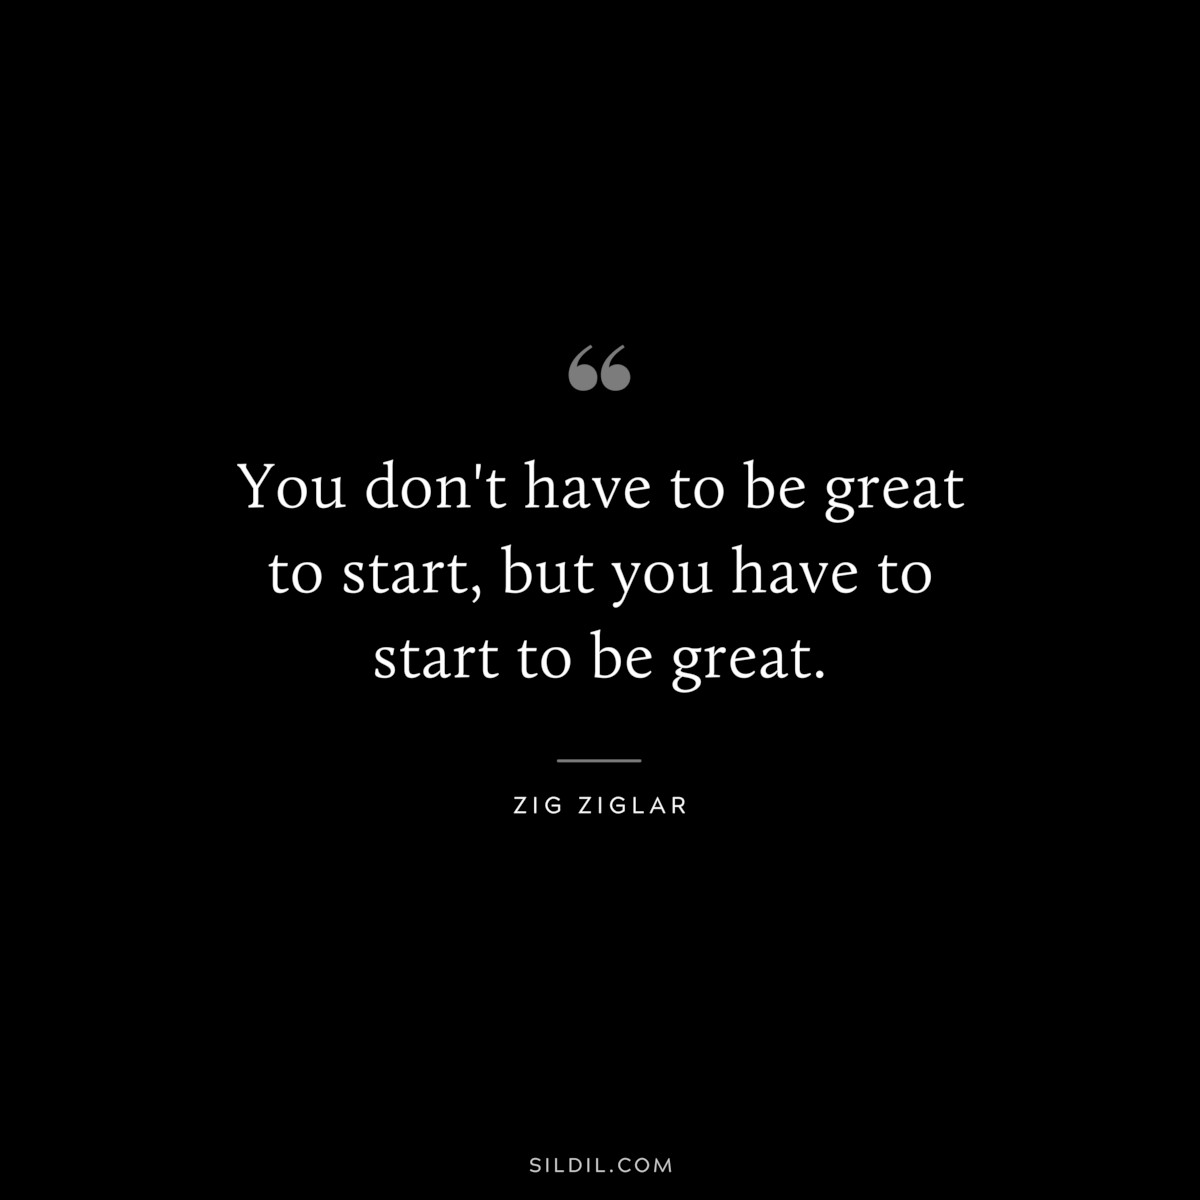 You don't have to be great to start, but you have to start to be great. ― Zig Ziglar